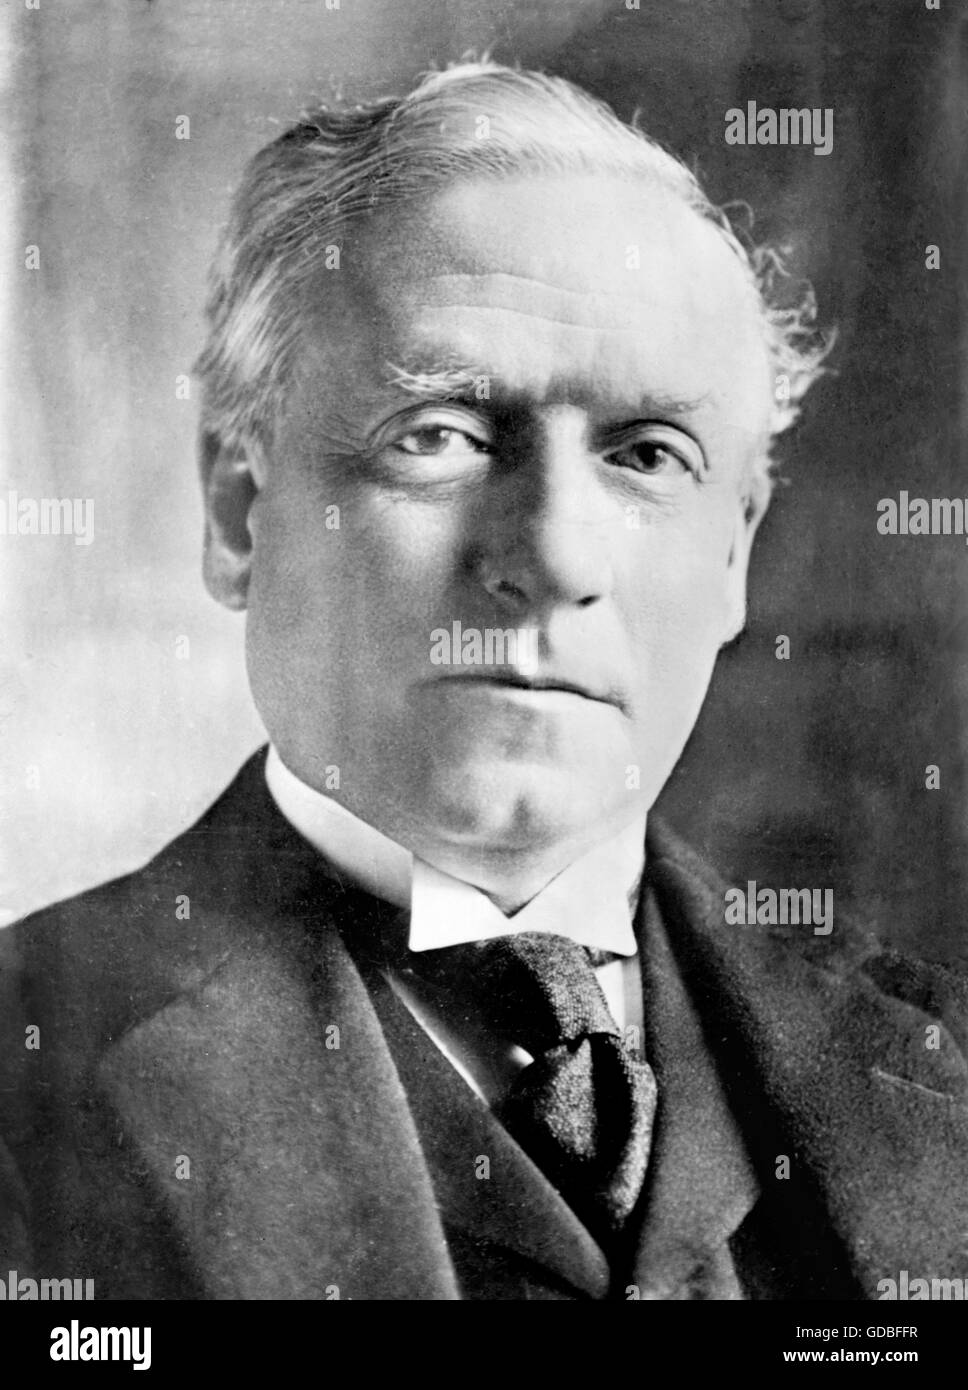 Herbert Asquith. Portrait of Liberal Prime Minister Herbert Henry Asquith, 1st Earl of Oxford and Asquith, (1852-1928),  from Bain News Service c.1916 Stock Photo